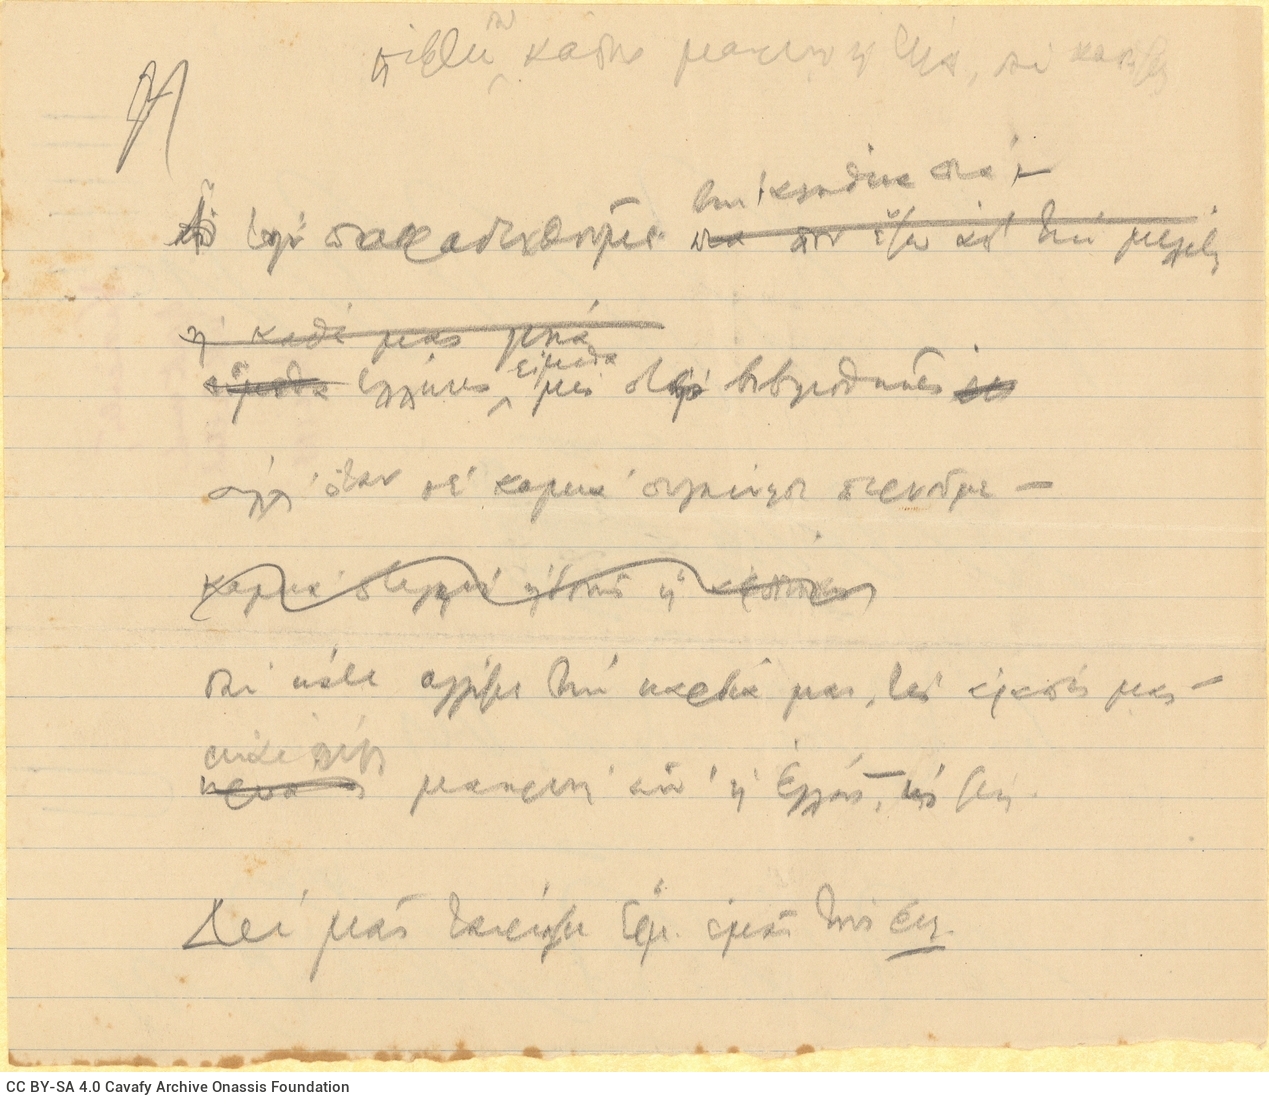 Handwritten poem and notes. The poem "Homecoming from Greece" and notes in the margin in first three pages of a double she